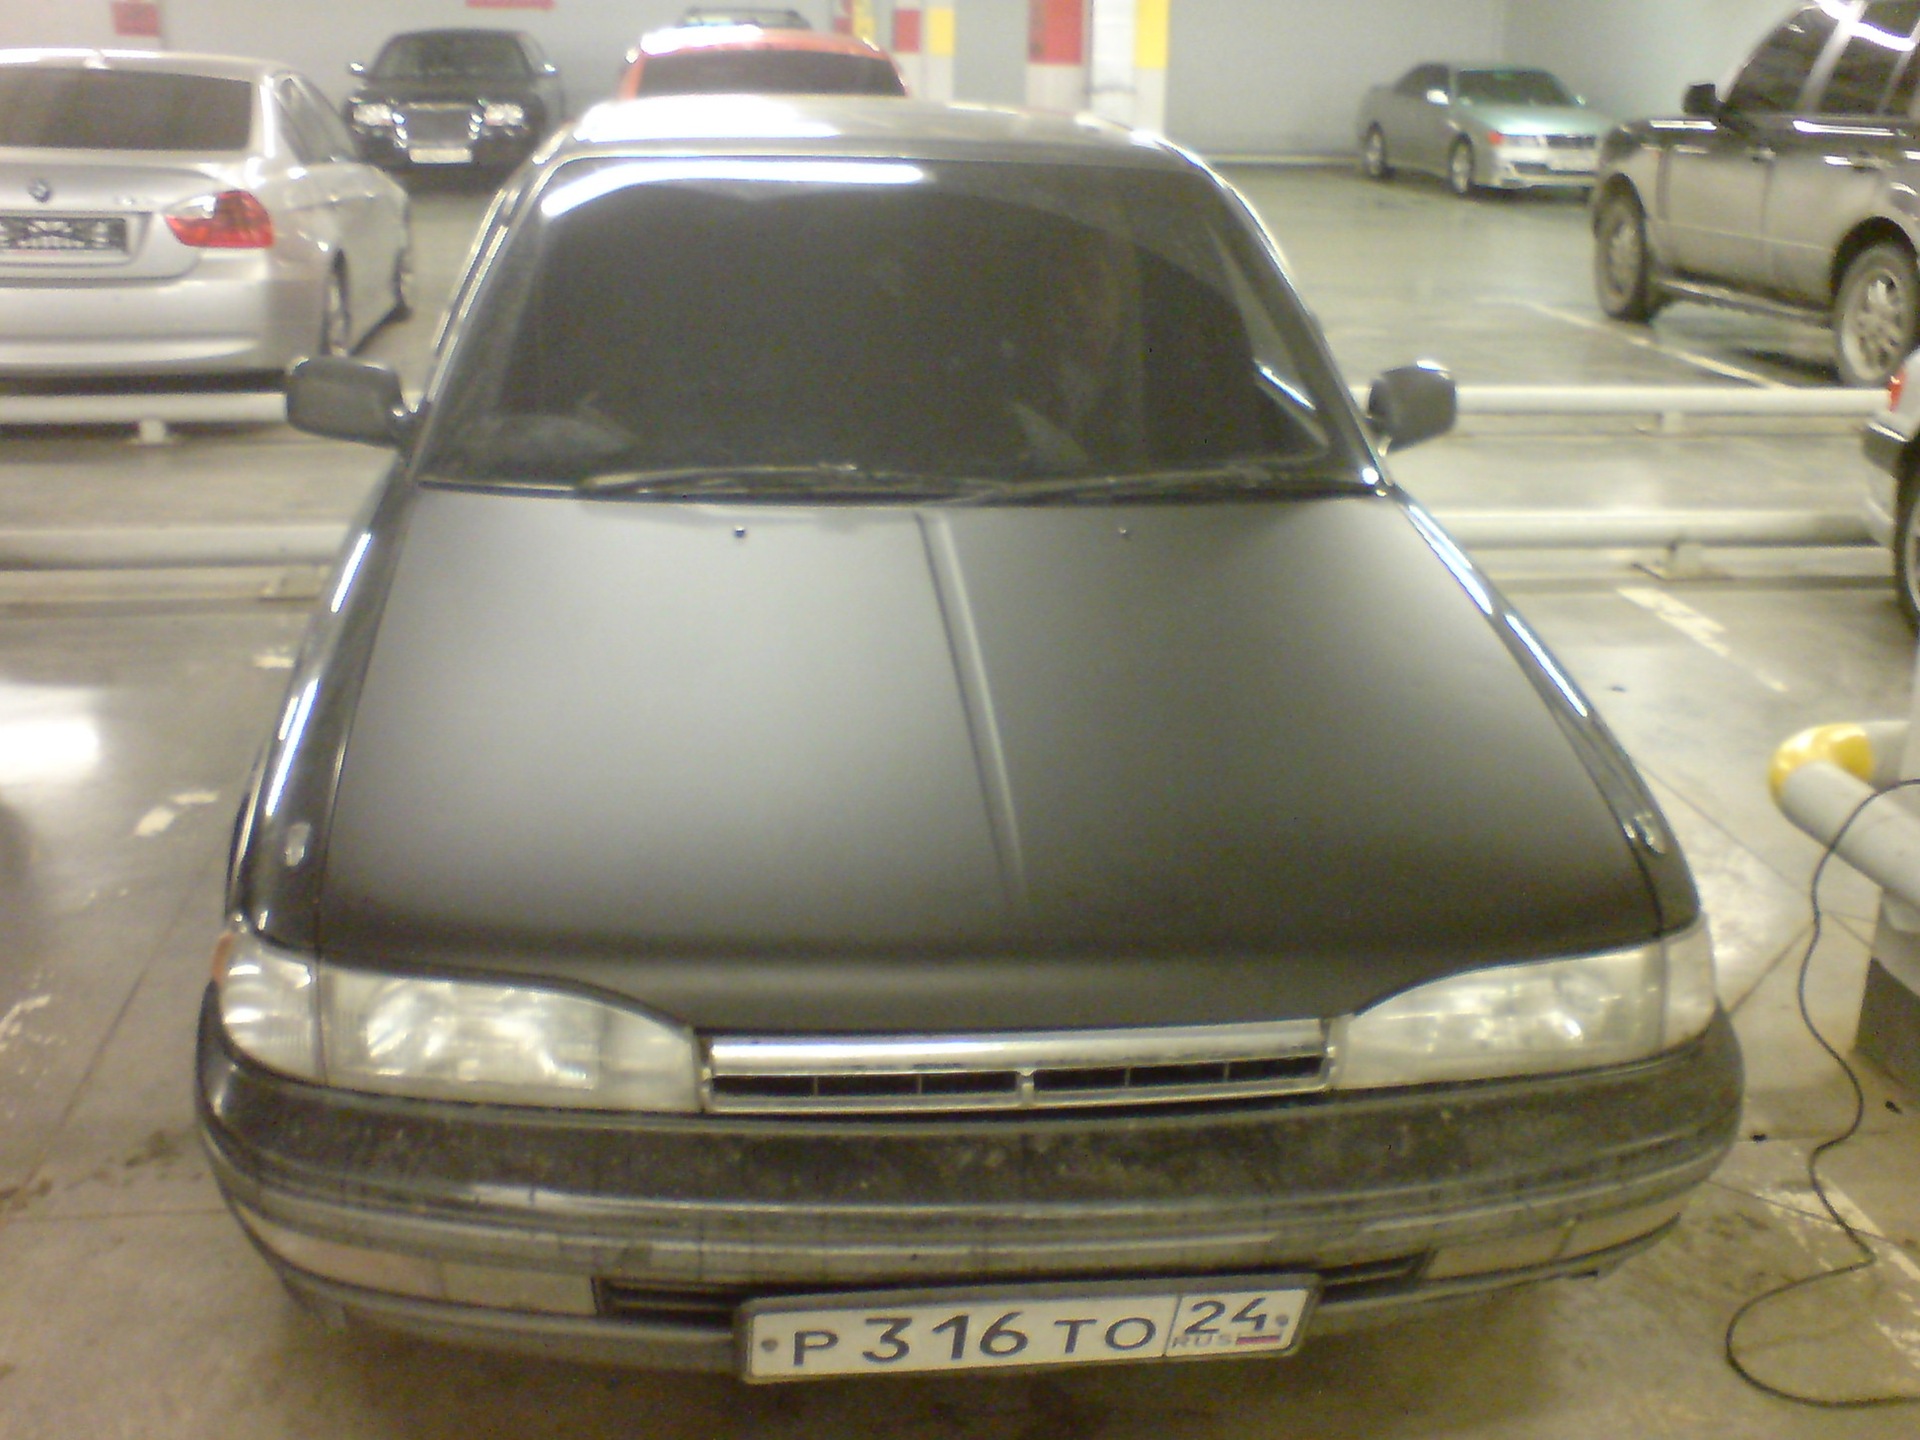 Tuning is declared open  - Toyota Carina 20 L 1991